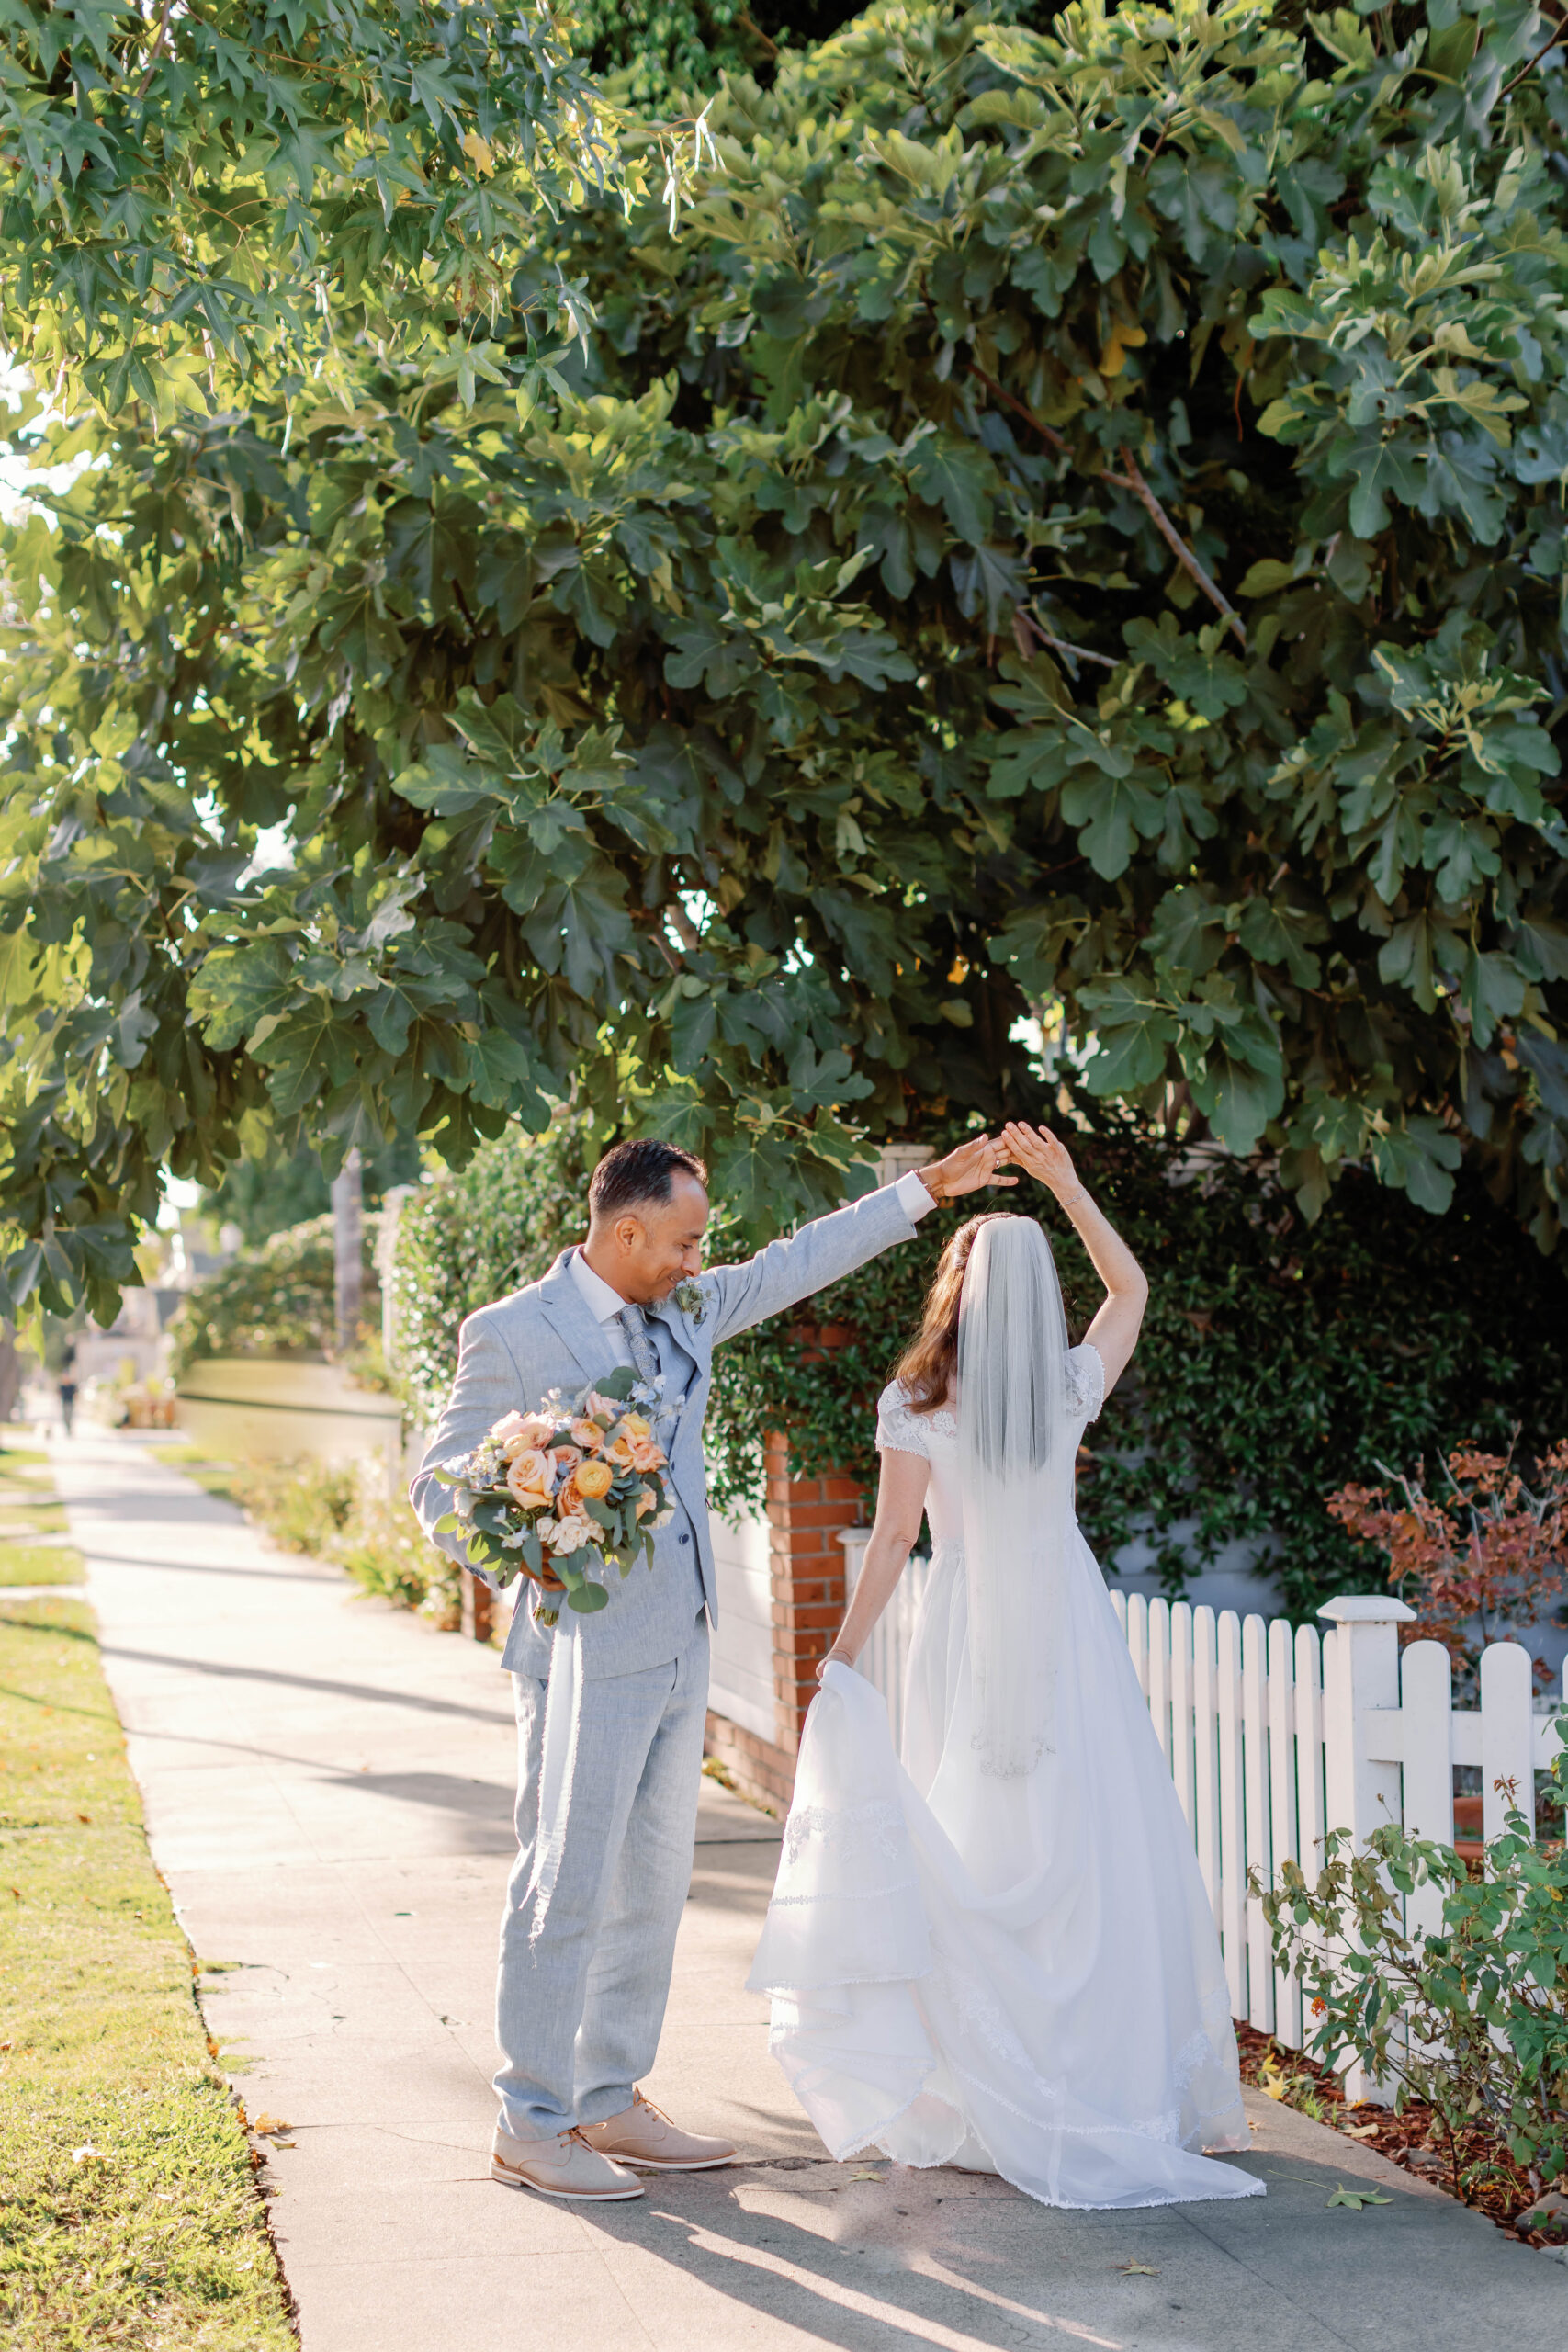 Bride and Groom twirl on the sidewalk in front of a fence in the sunlight | Photo by Sarah Block Photography